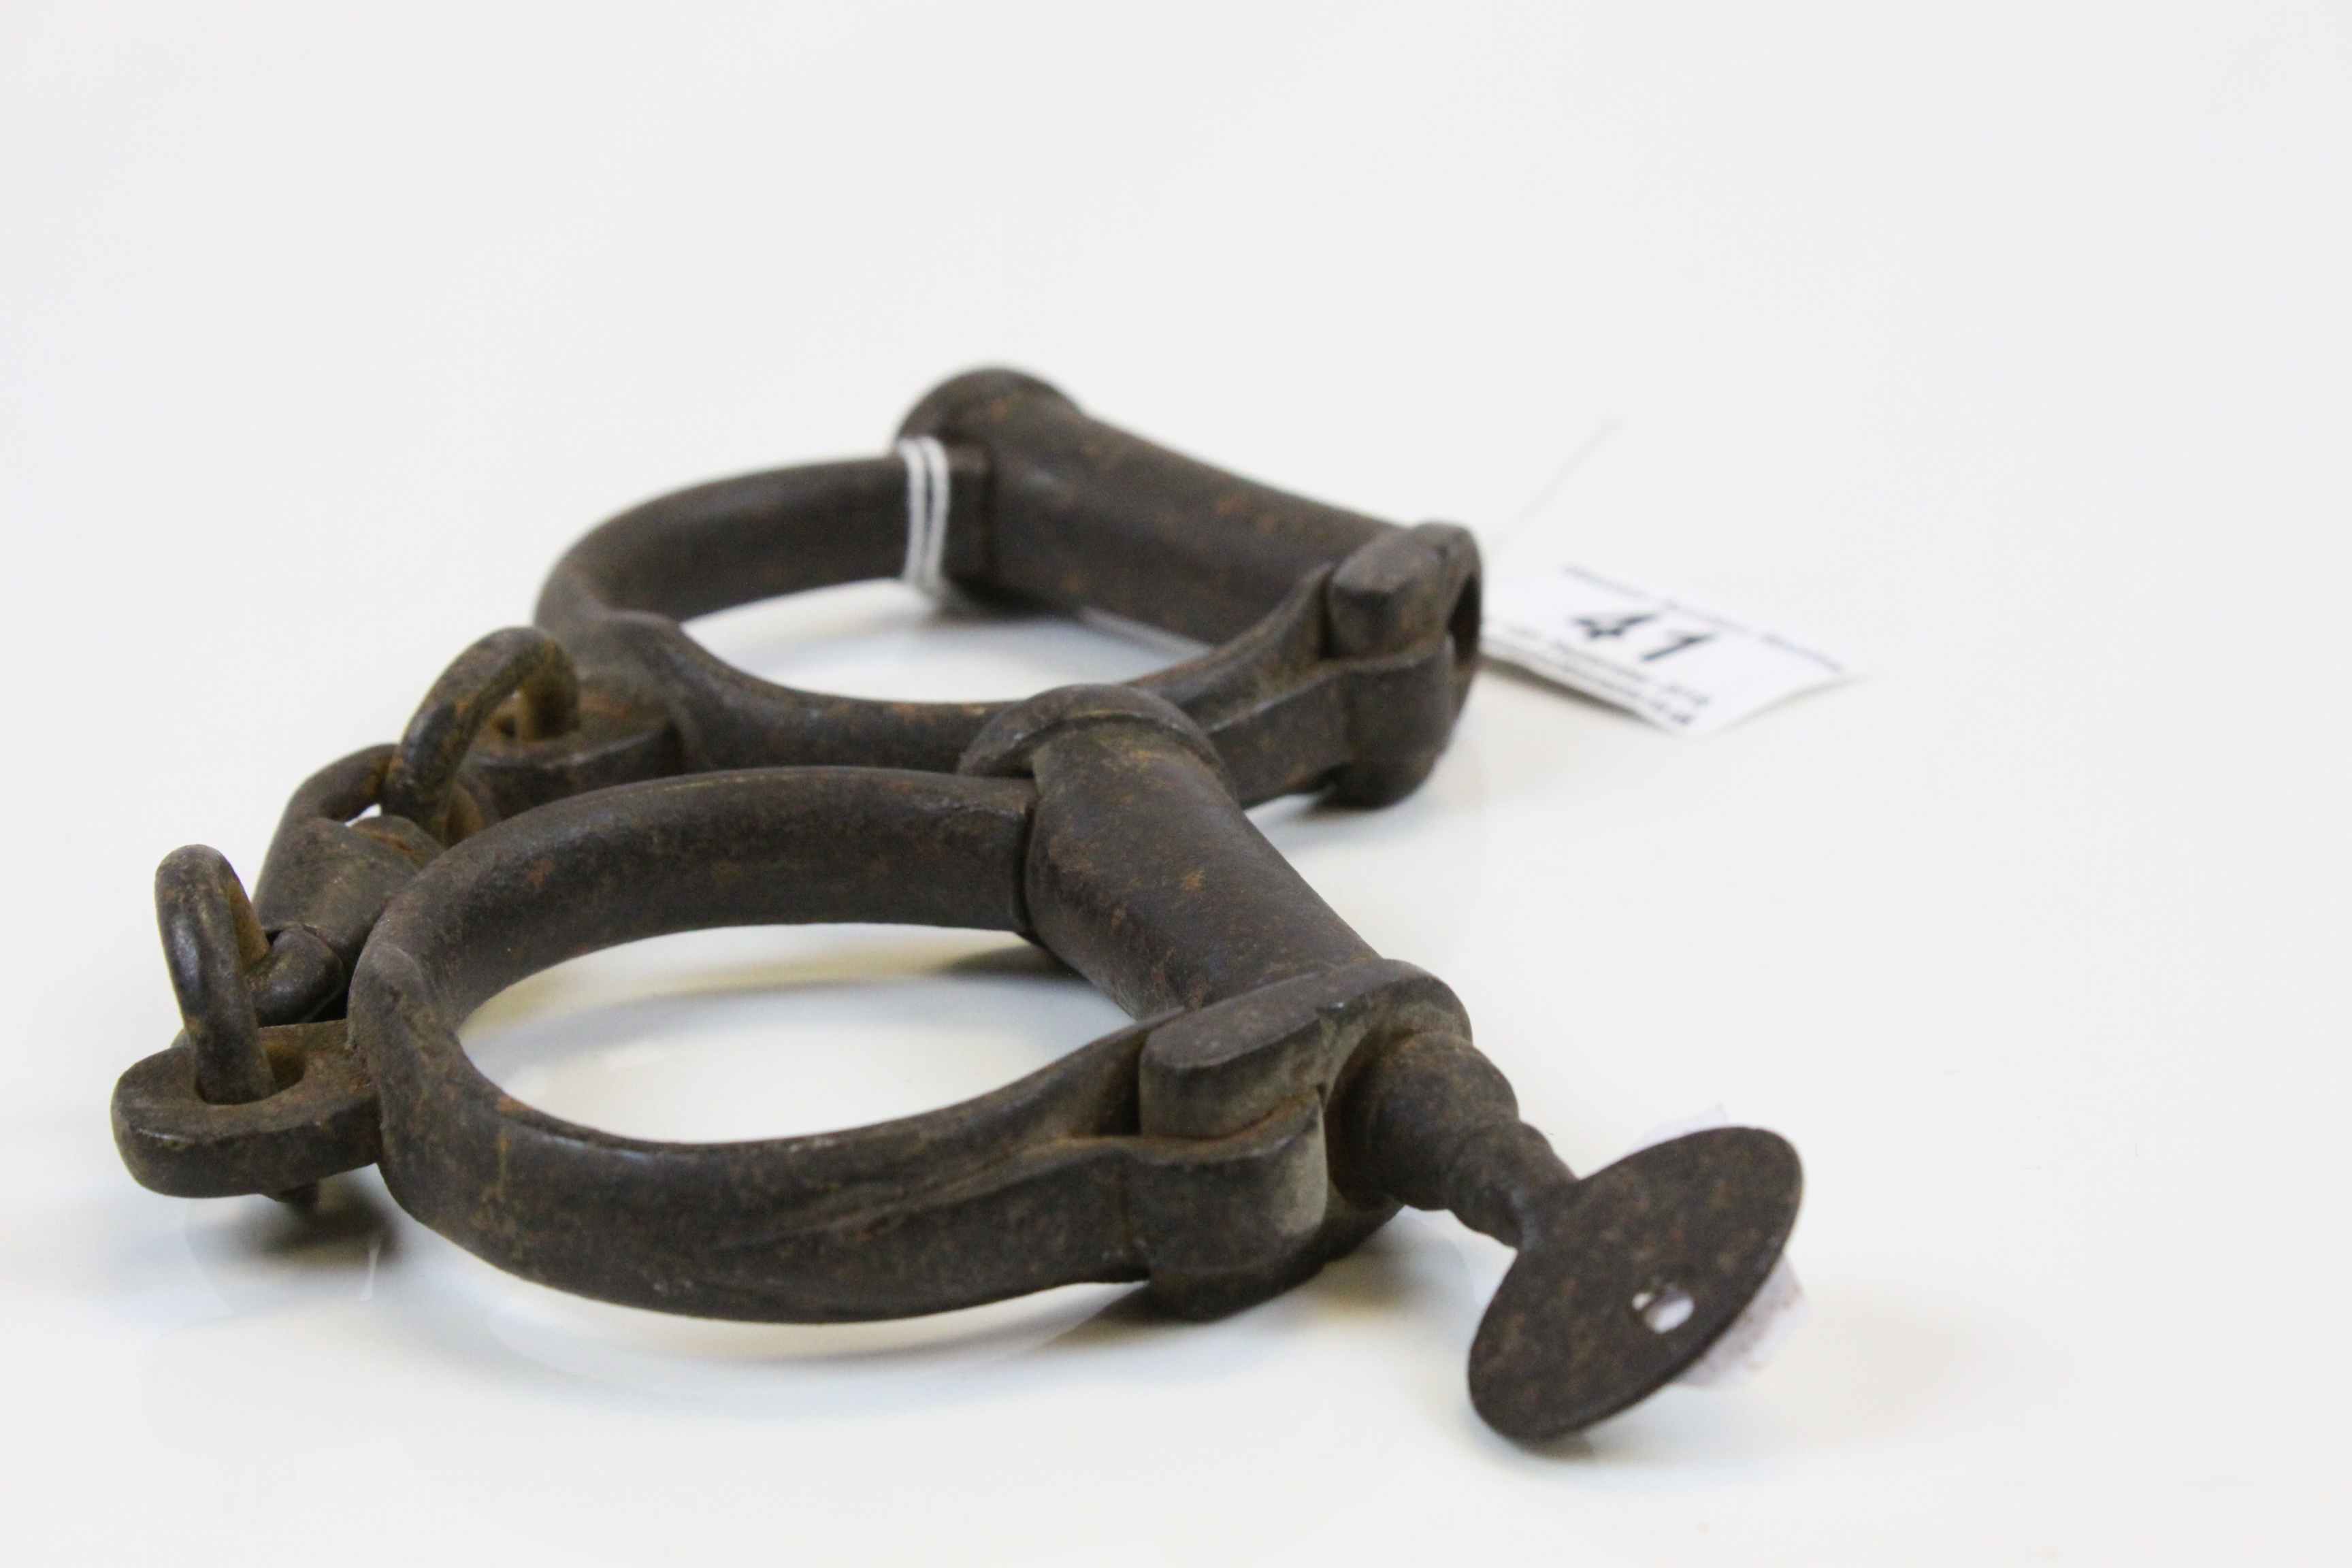 Vintage pair of cast Iron Police type Handcuffs by "Hiatt" - Image 4 of 4